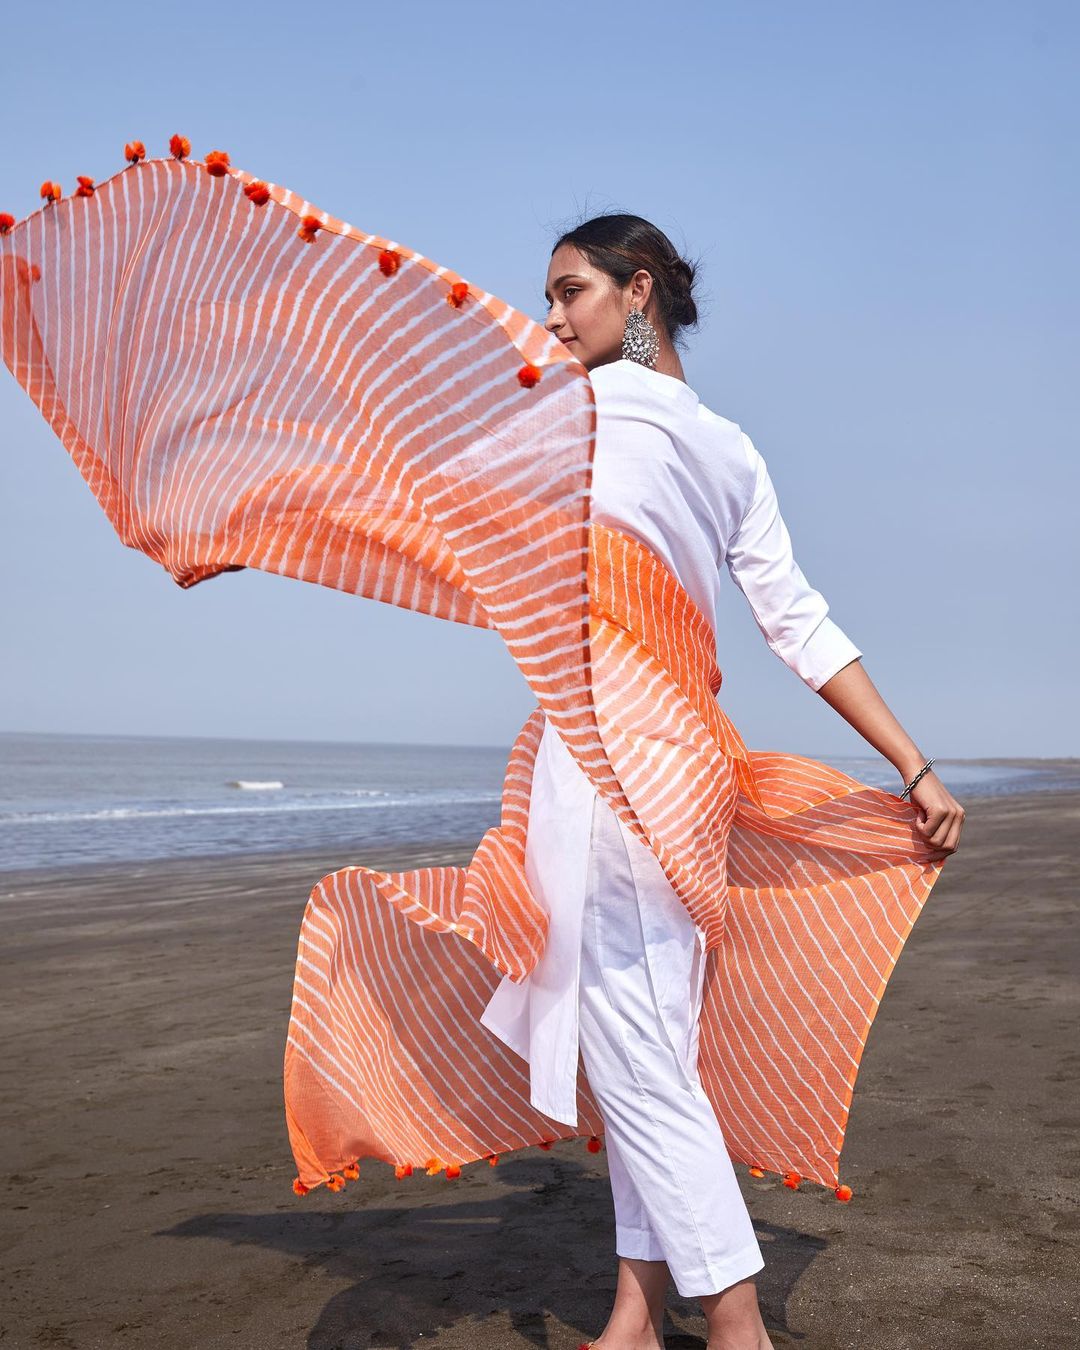 A lady wearing white suit with orange dupatta by the beach